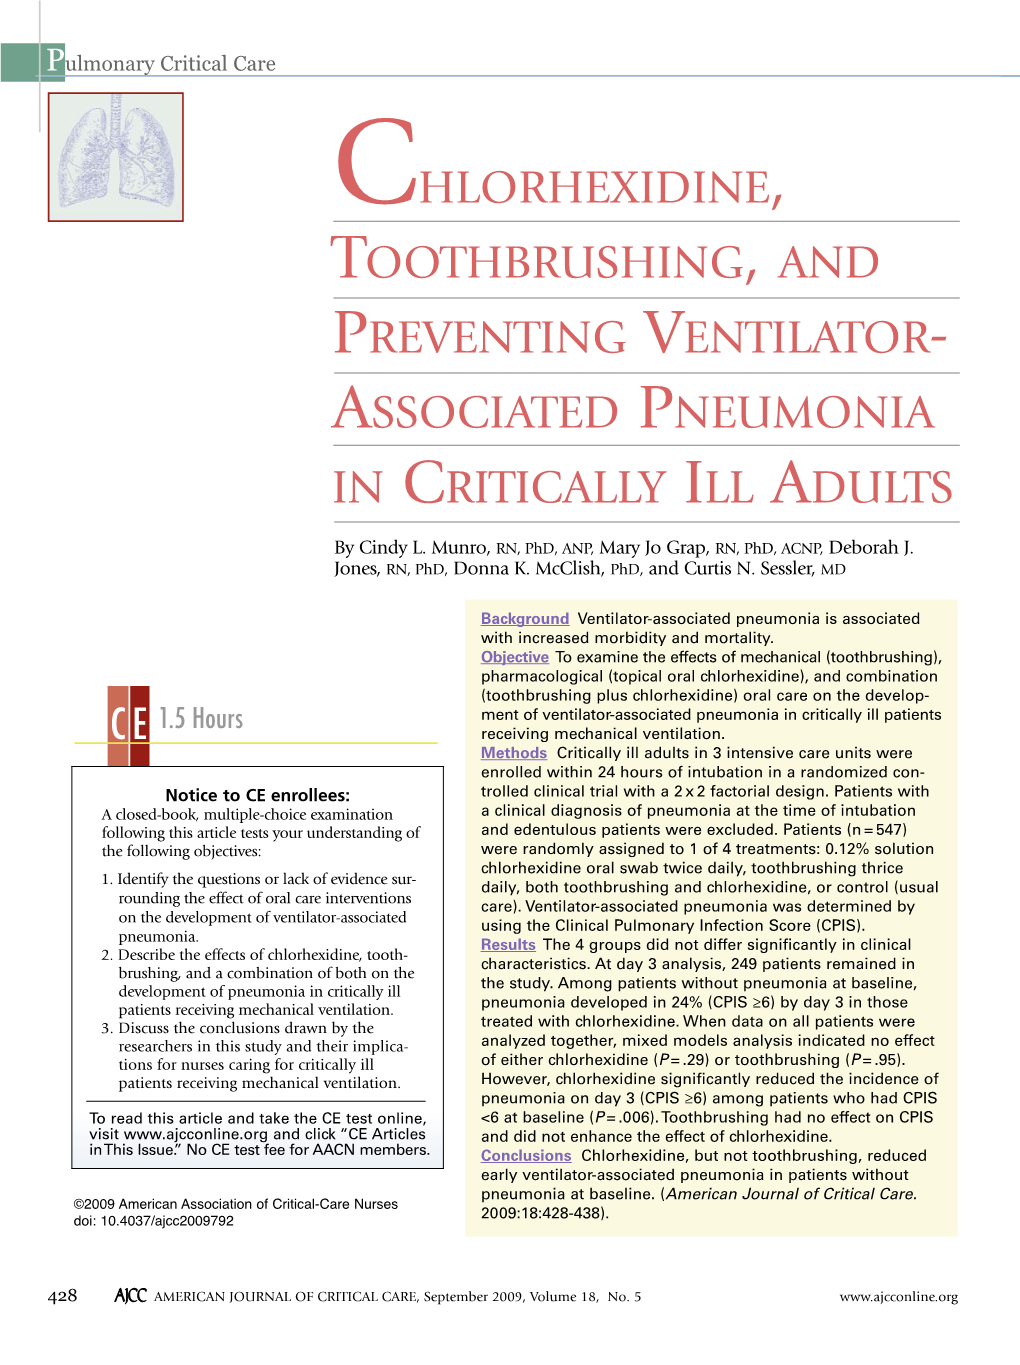 Chlorhexidine, Toothbrushing, and Preventing Ventilator Associated